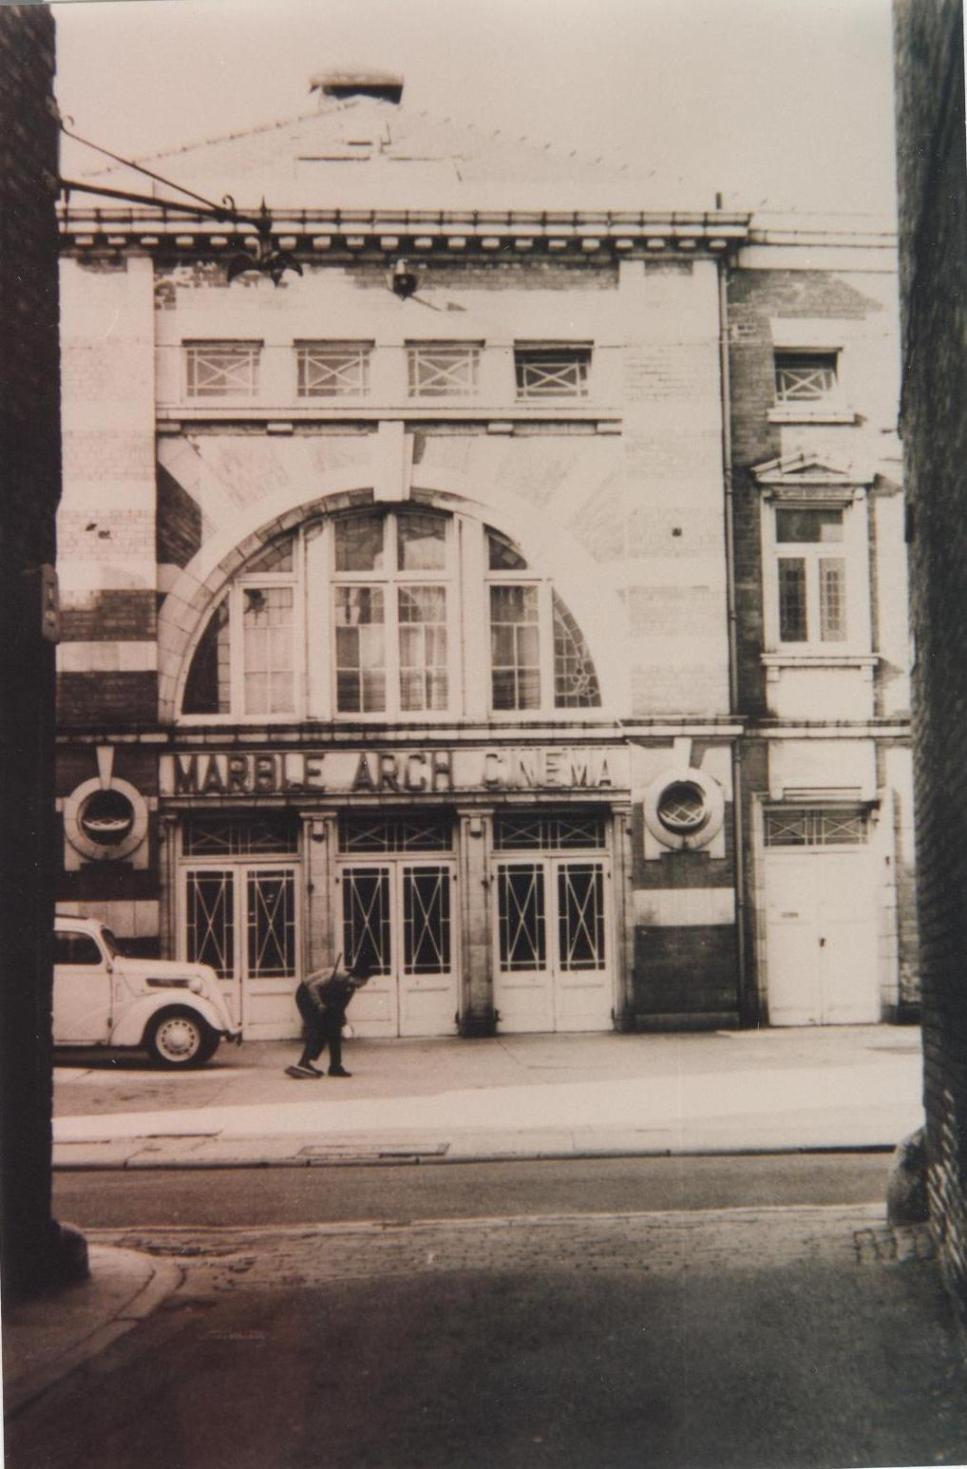 Marble Arch cinema, Butcher Row, Beverley 1950s (archive ref DDX1544-1-13)